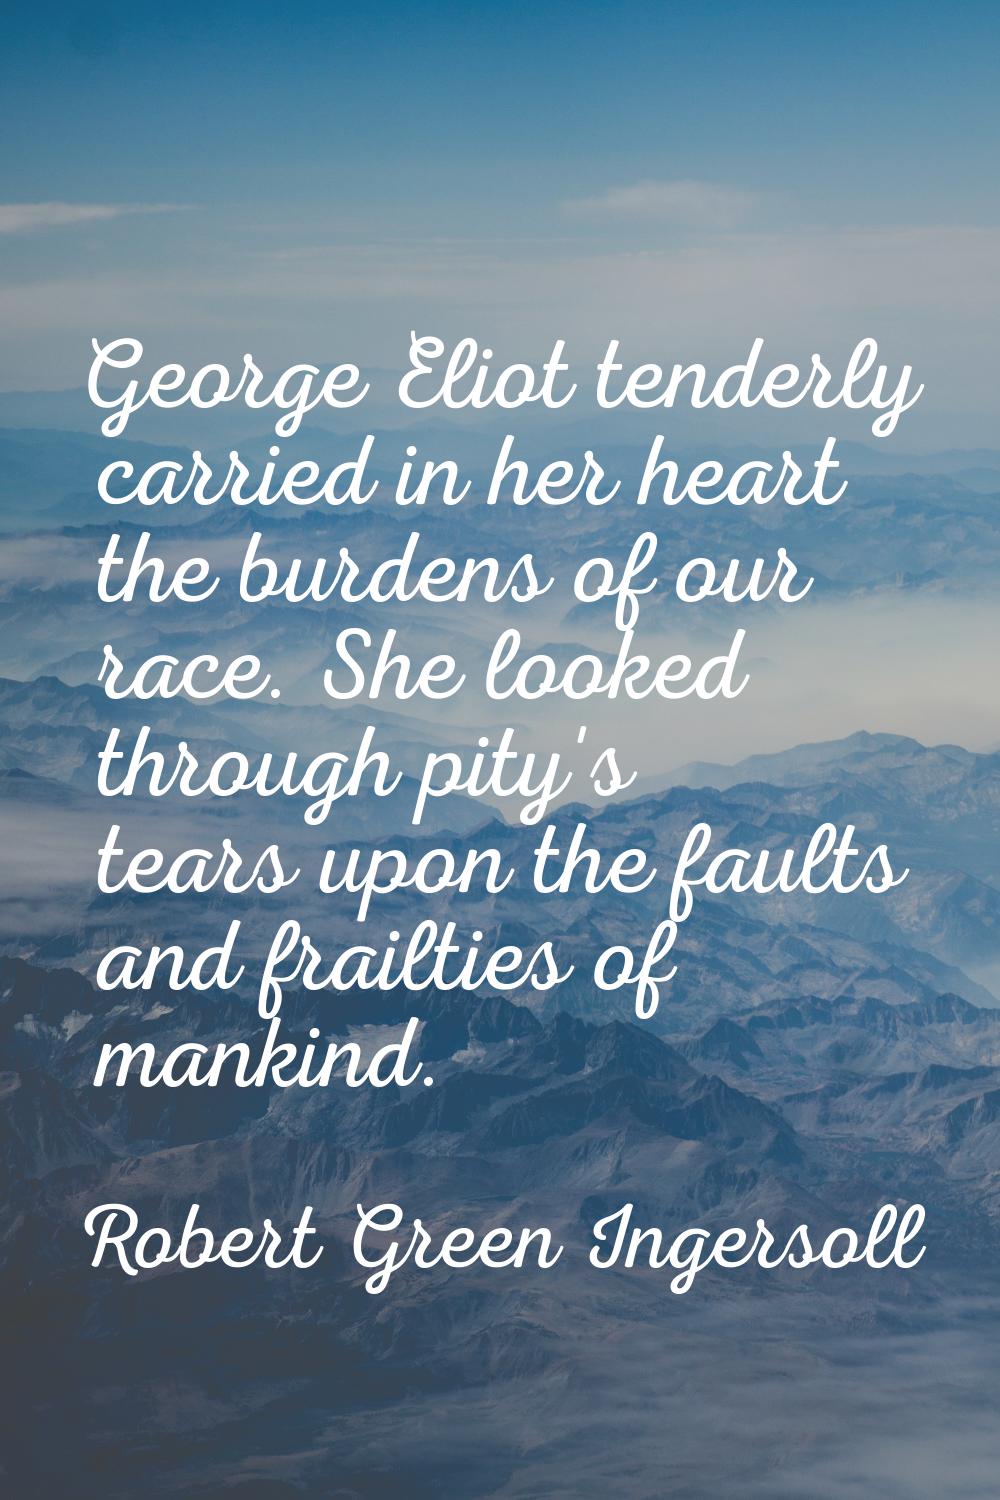 George Eliot tenderly carried in her heart the burdens of our race. She looked through pity's tears